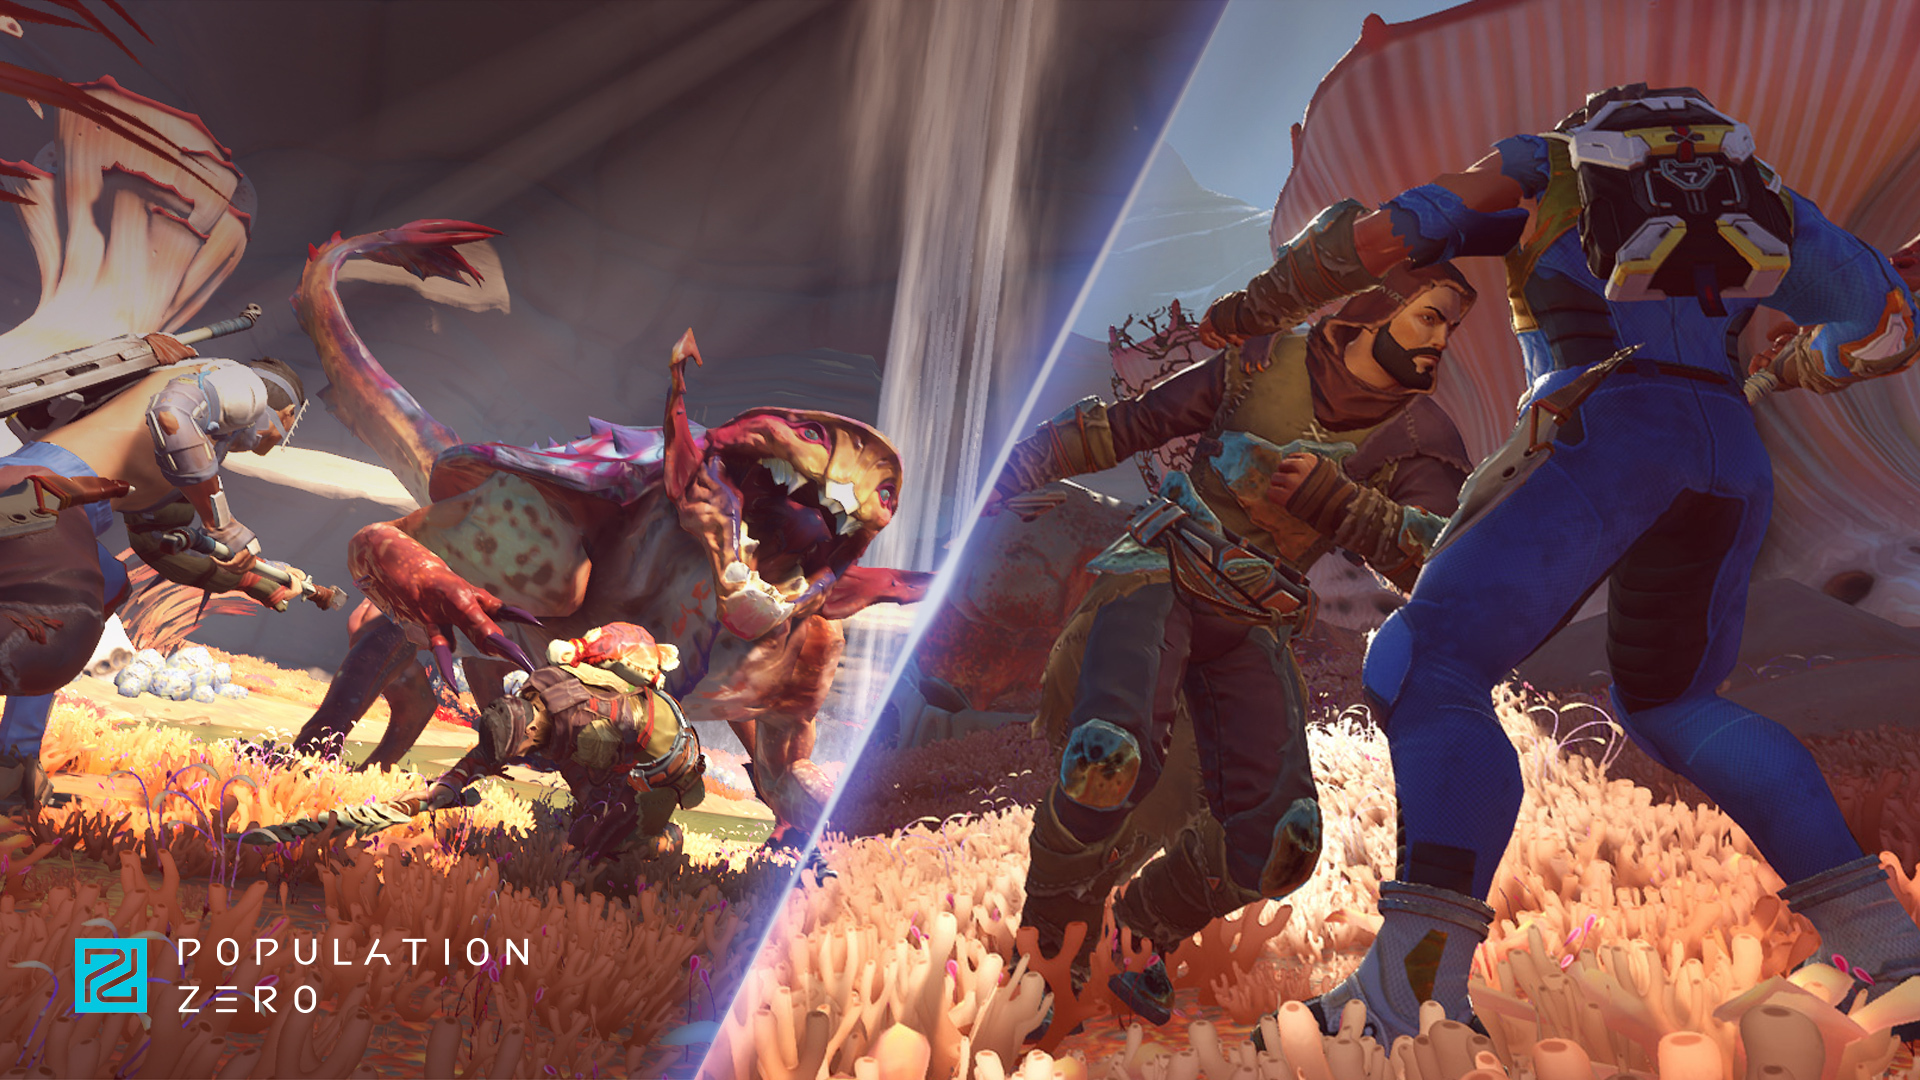 Population Zero Bringing You More Variety Pve And Pvp Modes Explained Steam News